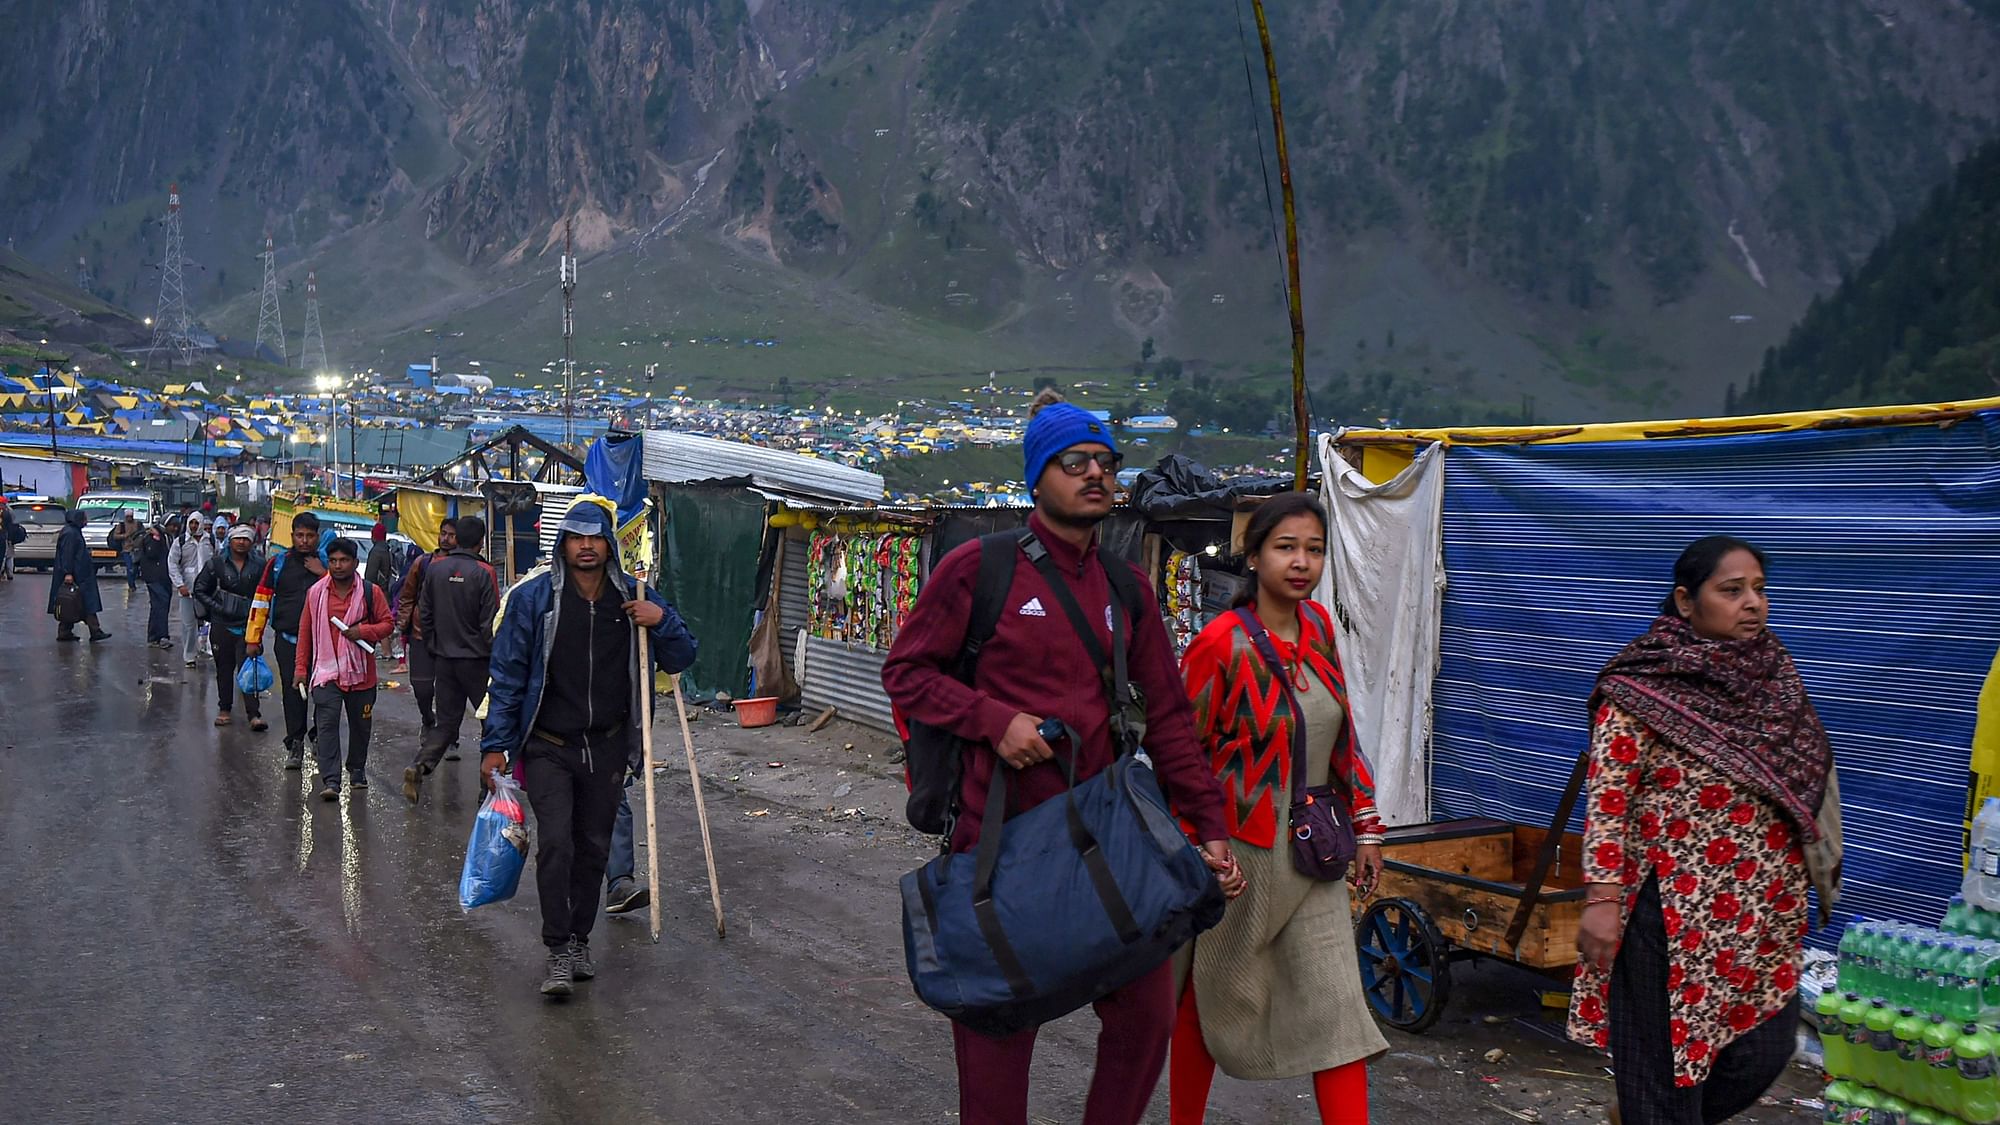 <div class="paragraphs"><p>Pilgrims returning to their base camps on Saturday, 9 July, a day after the cloudburst near the Amarnath cave in Kashmir.</p></div>